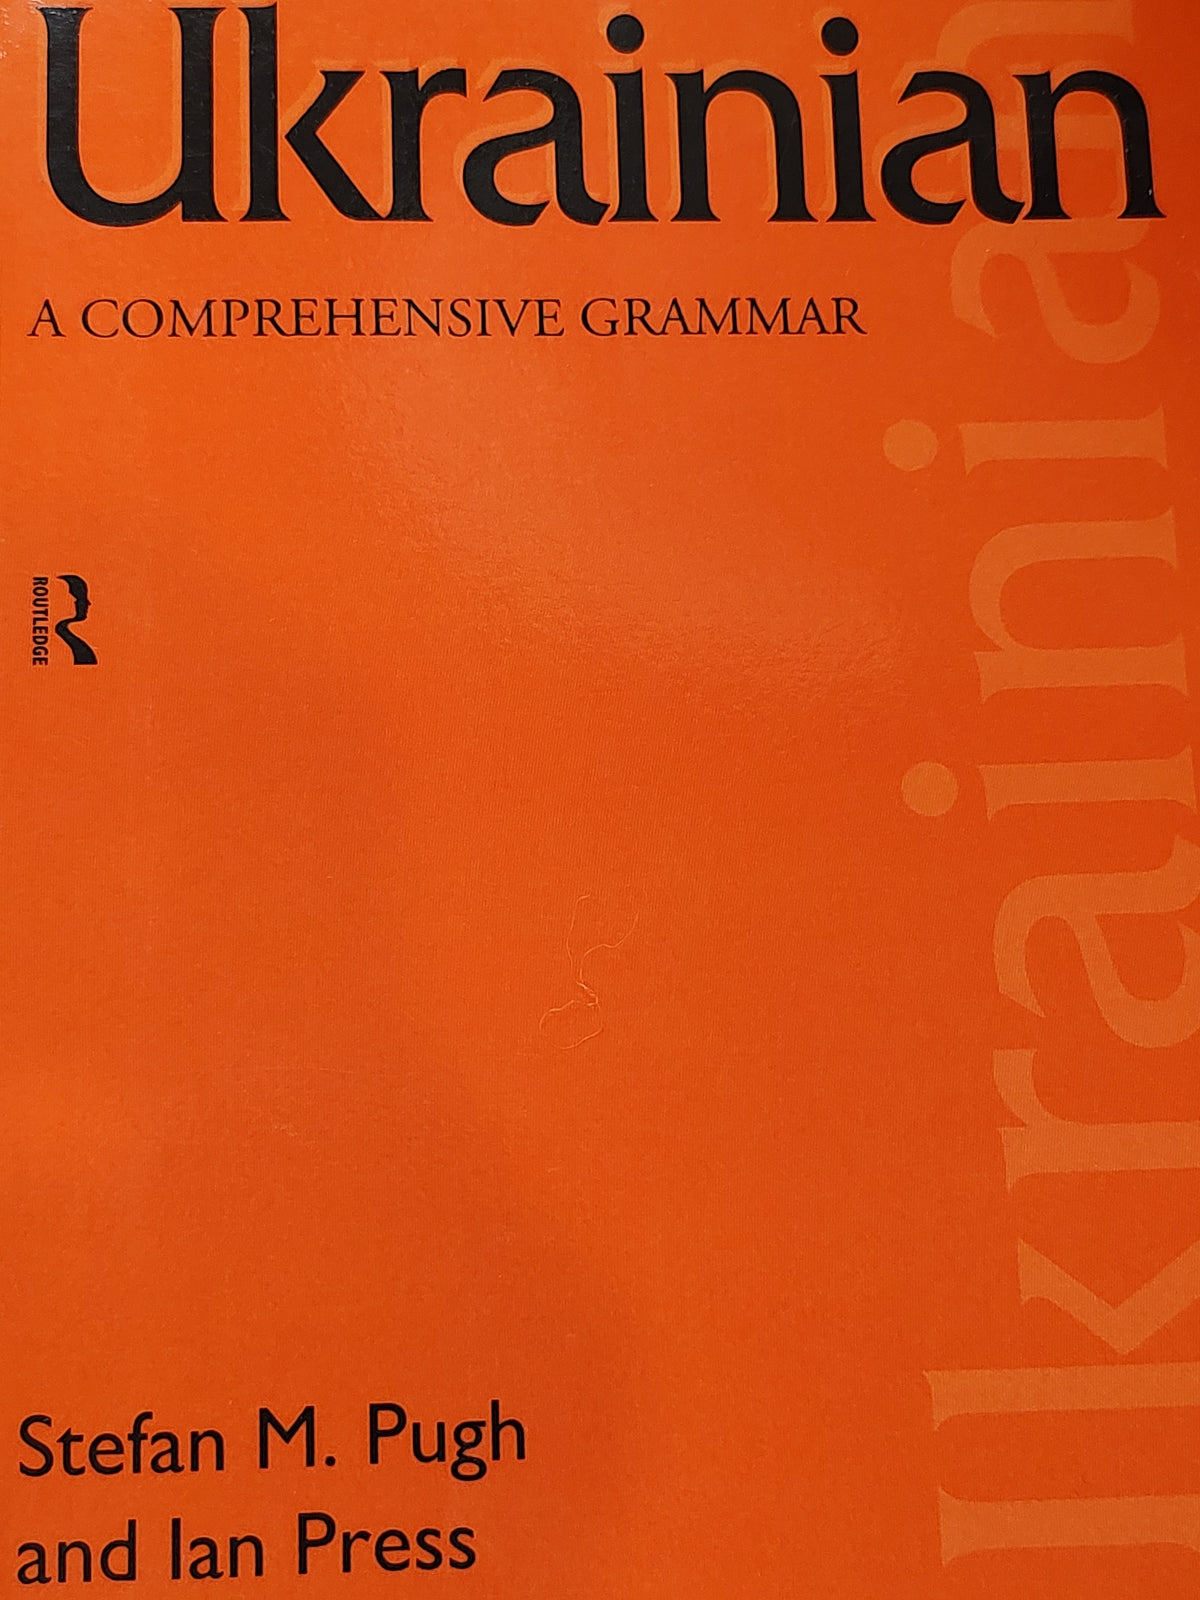 Ukrainian a comprehensive Grammar by Routledge like new